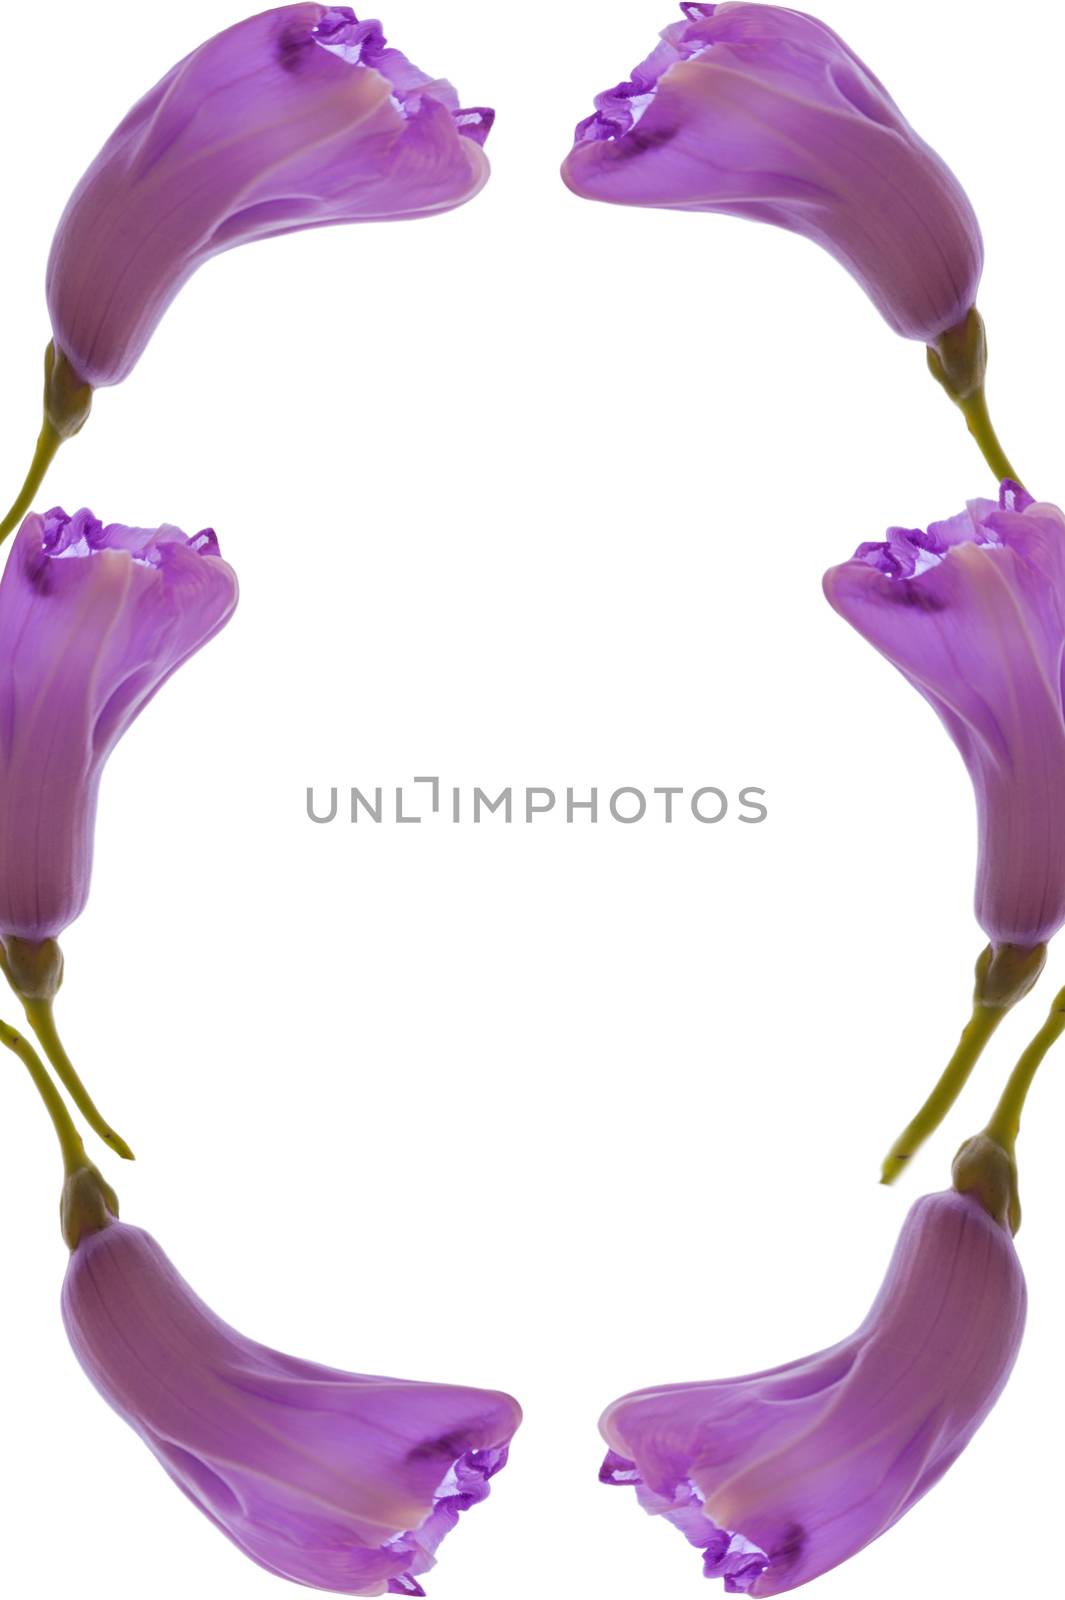 Flower picture frame by jimbophoto